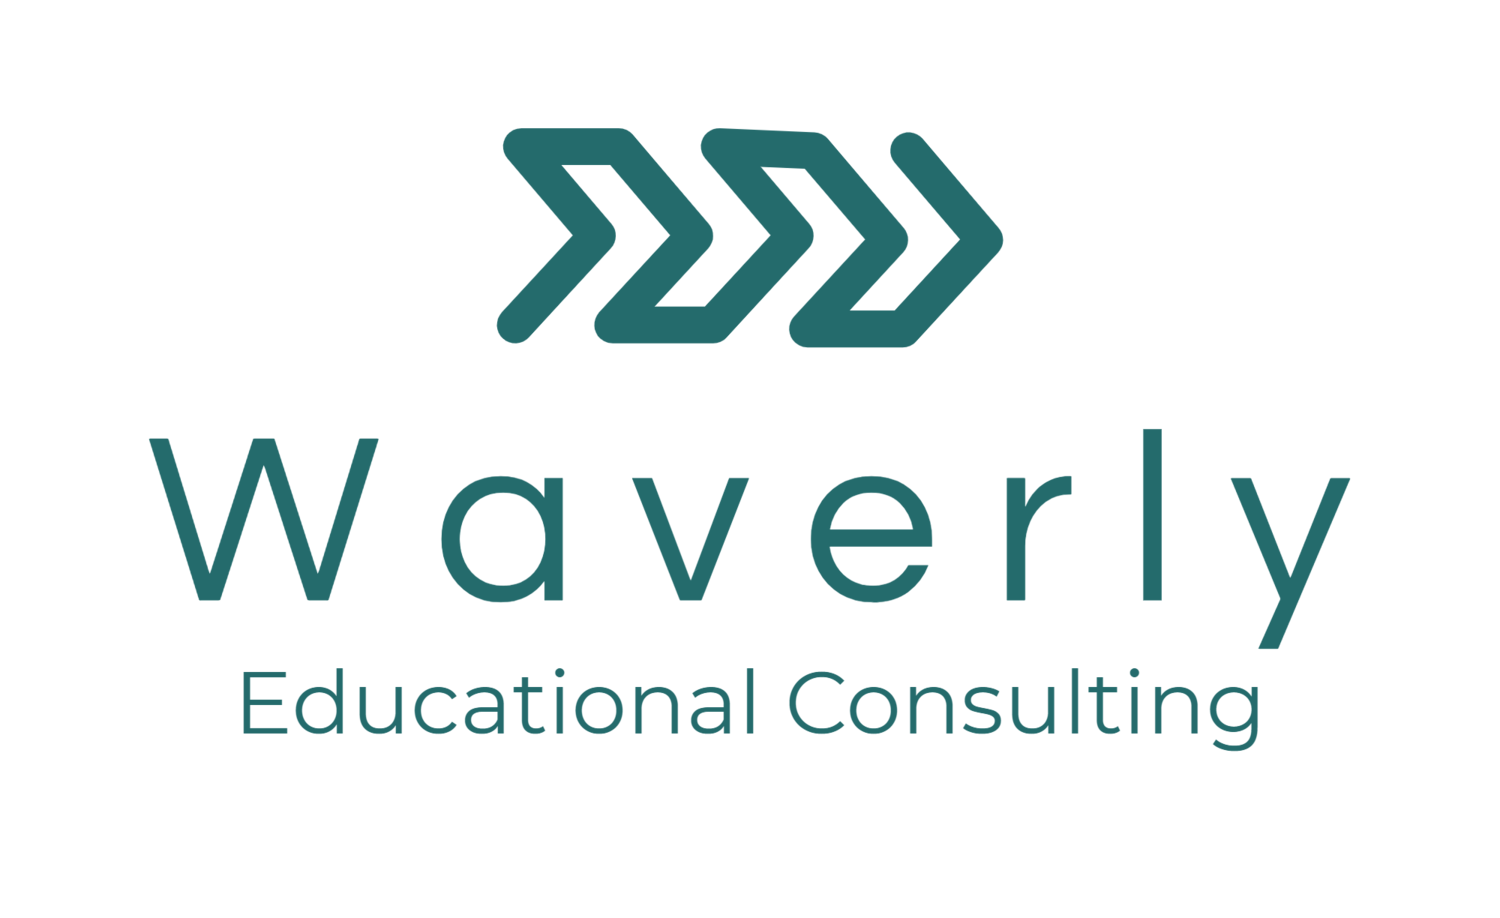 Waverly Educational Consulting